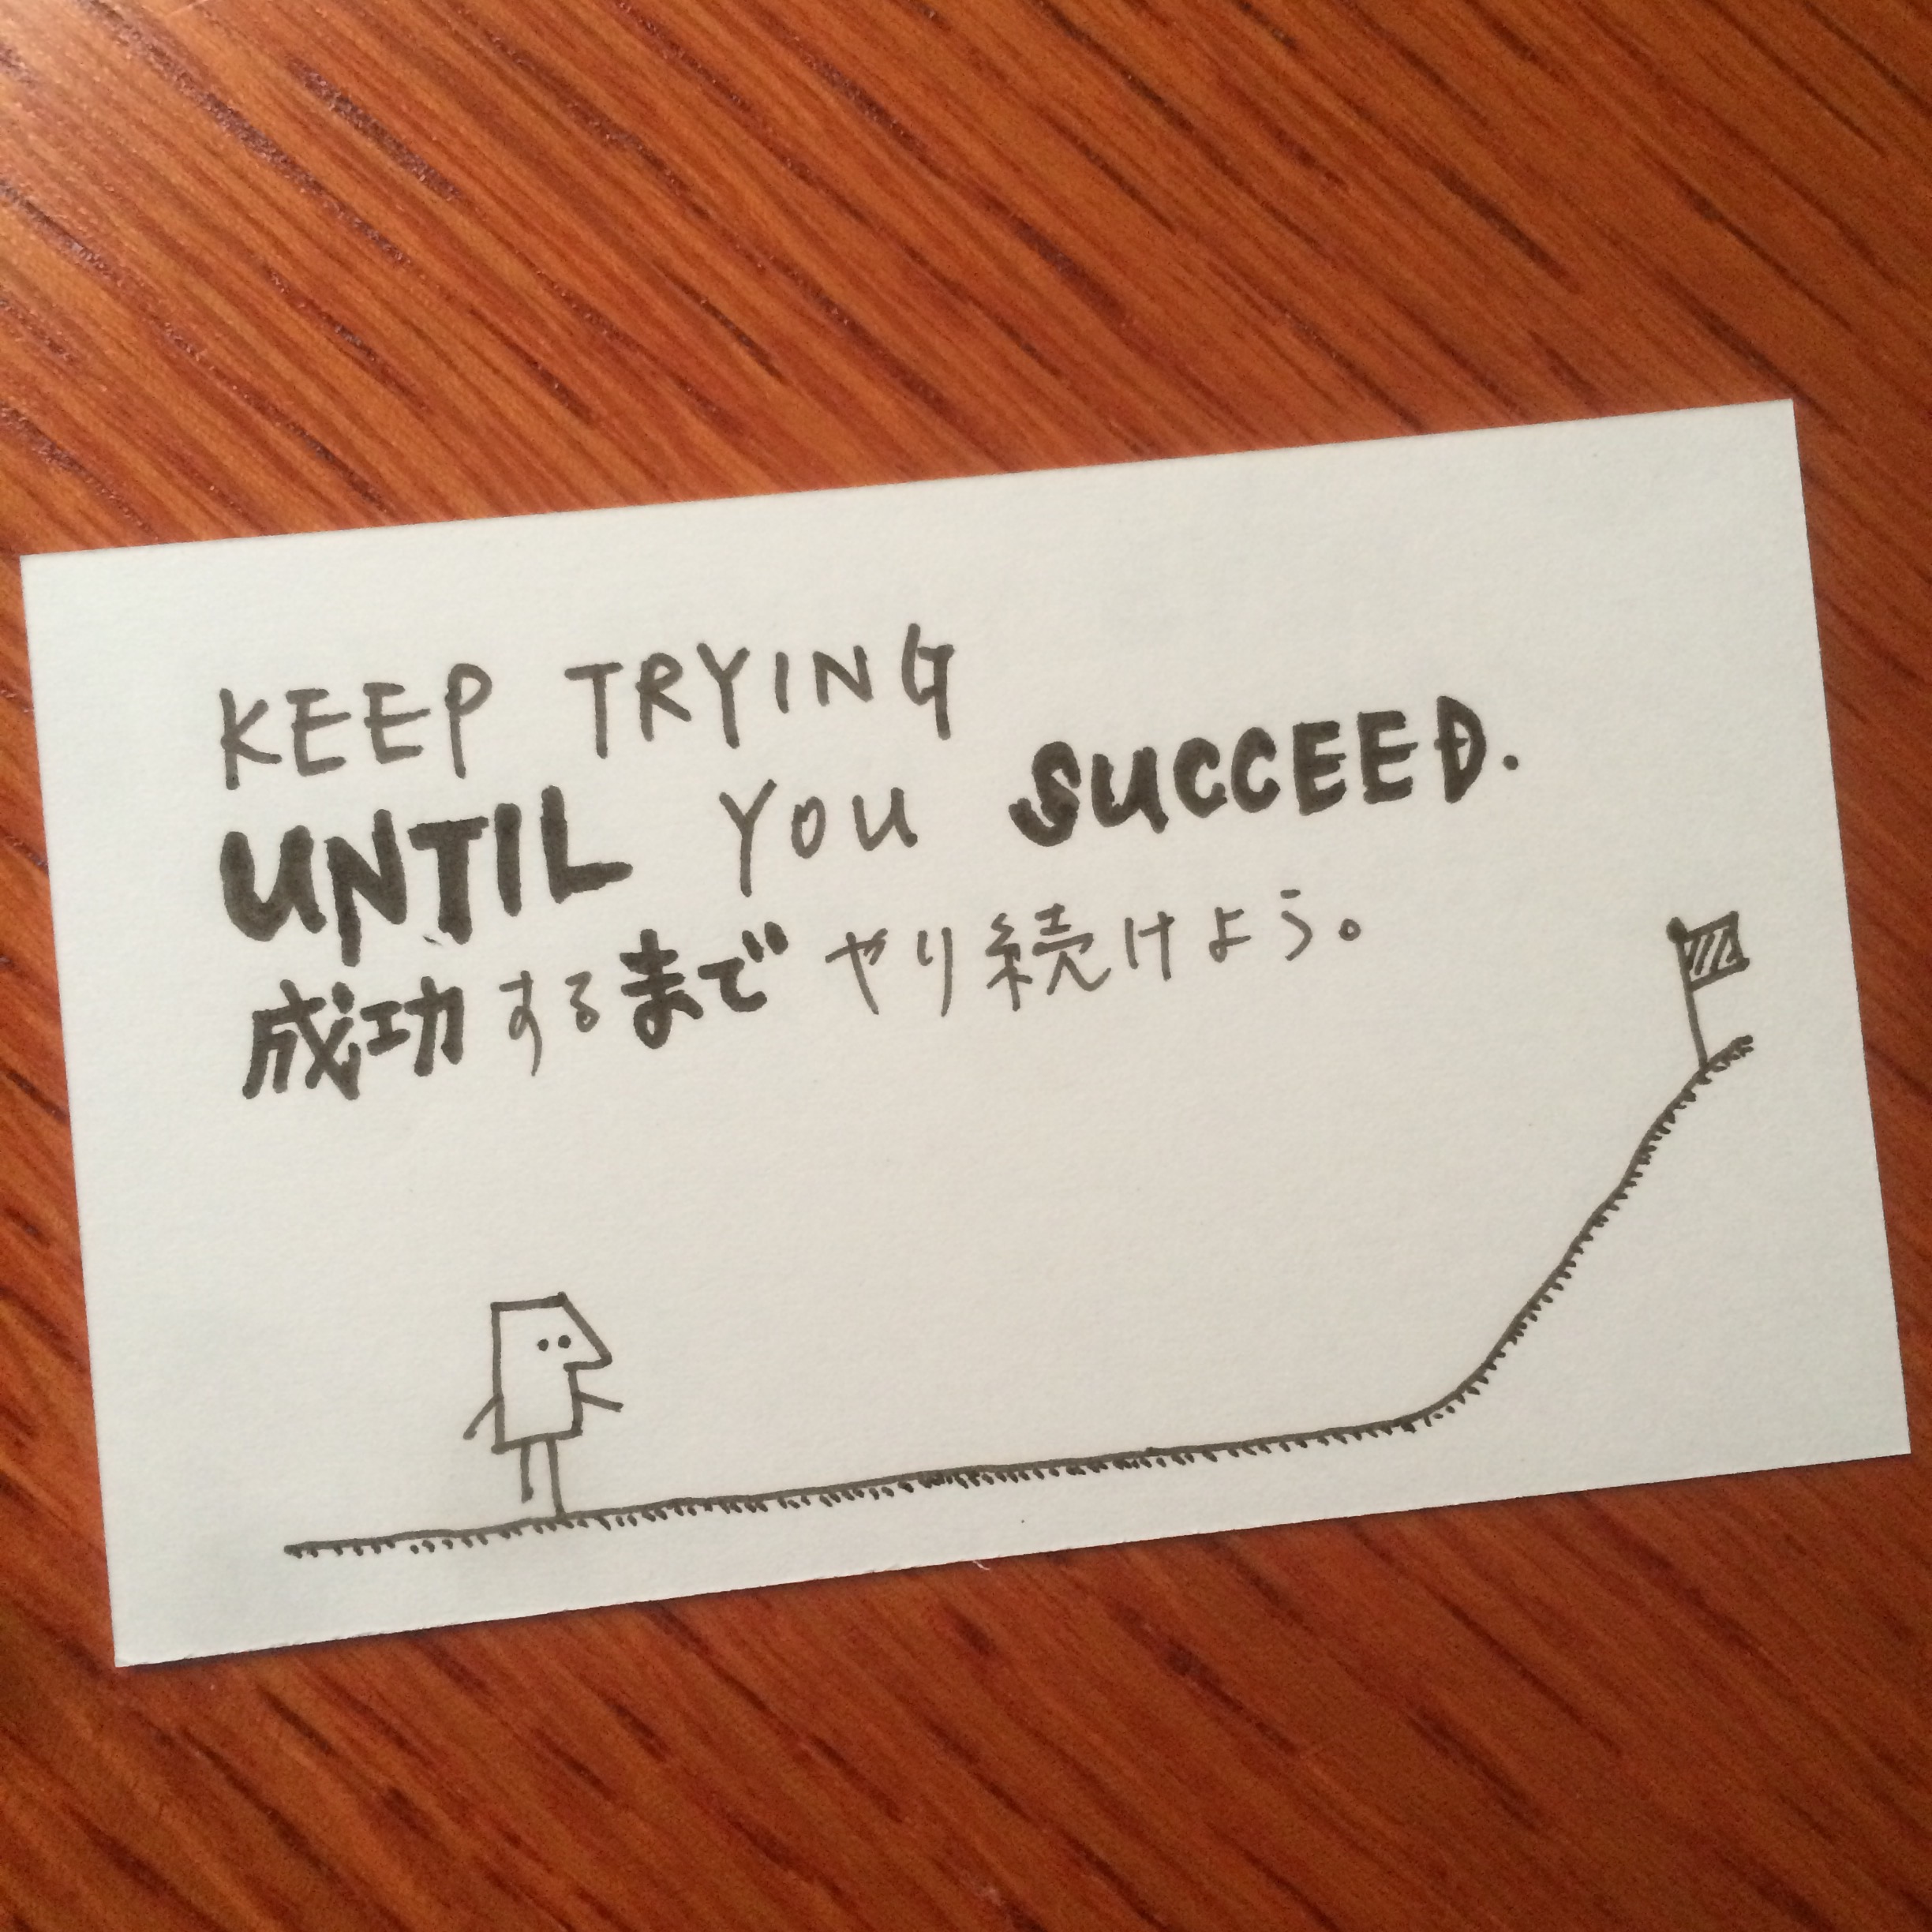 Keep trying until you succeed.